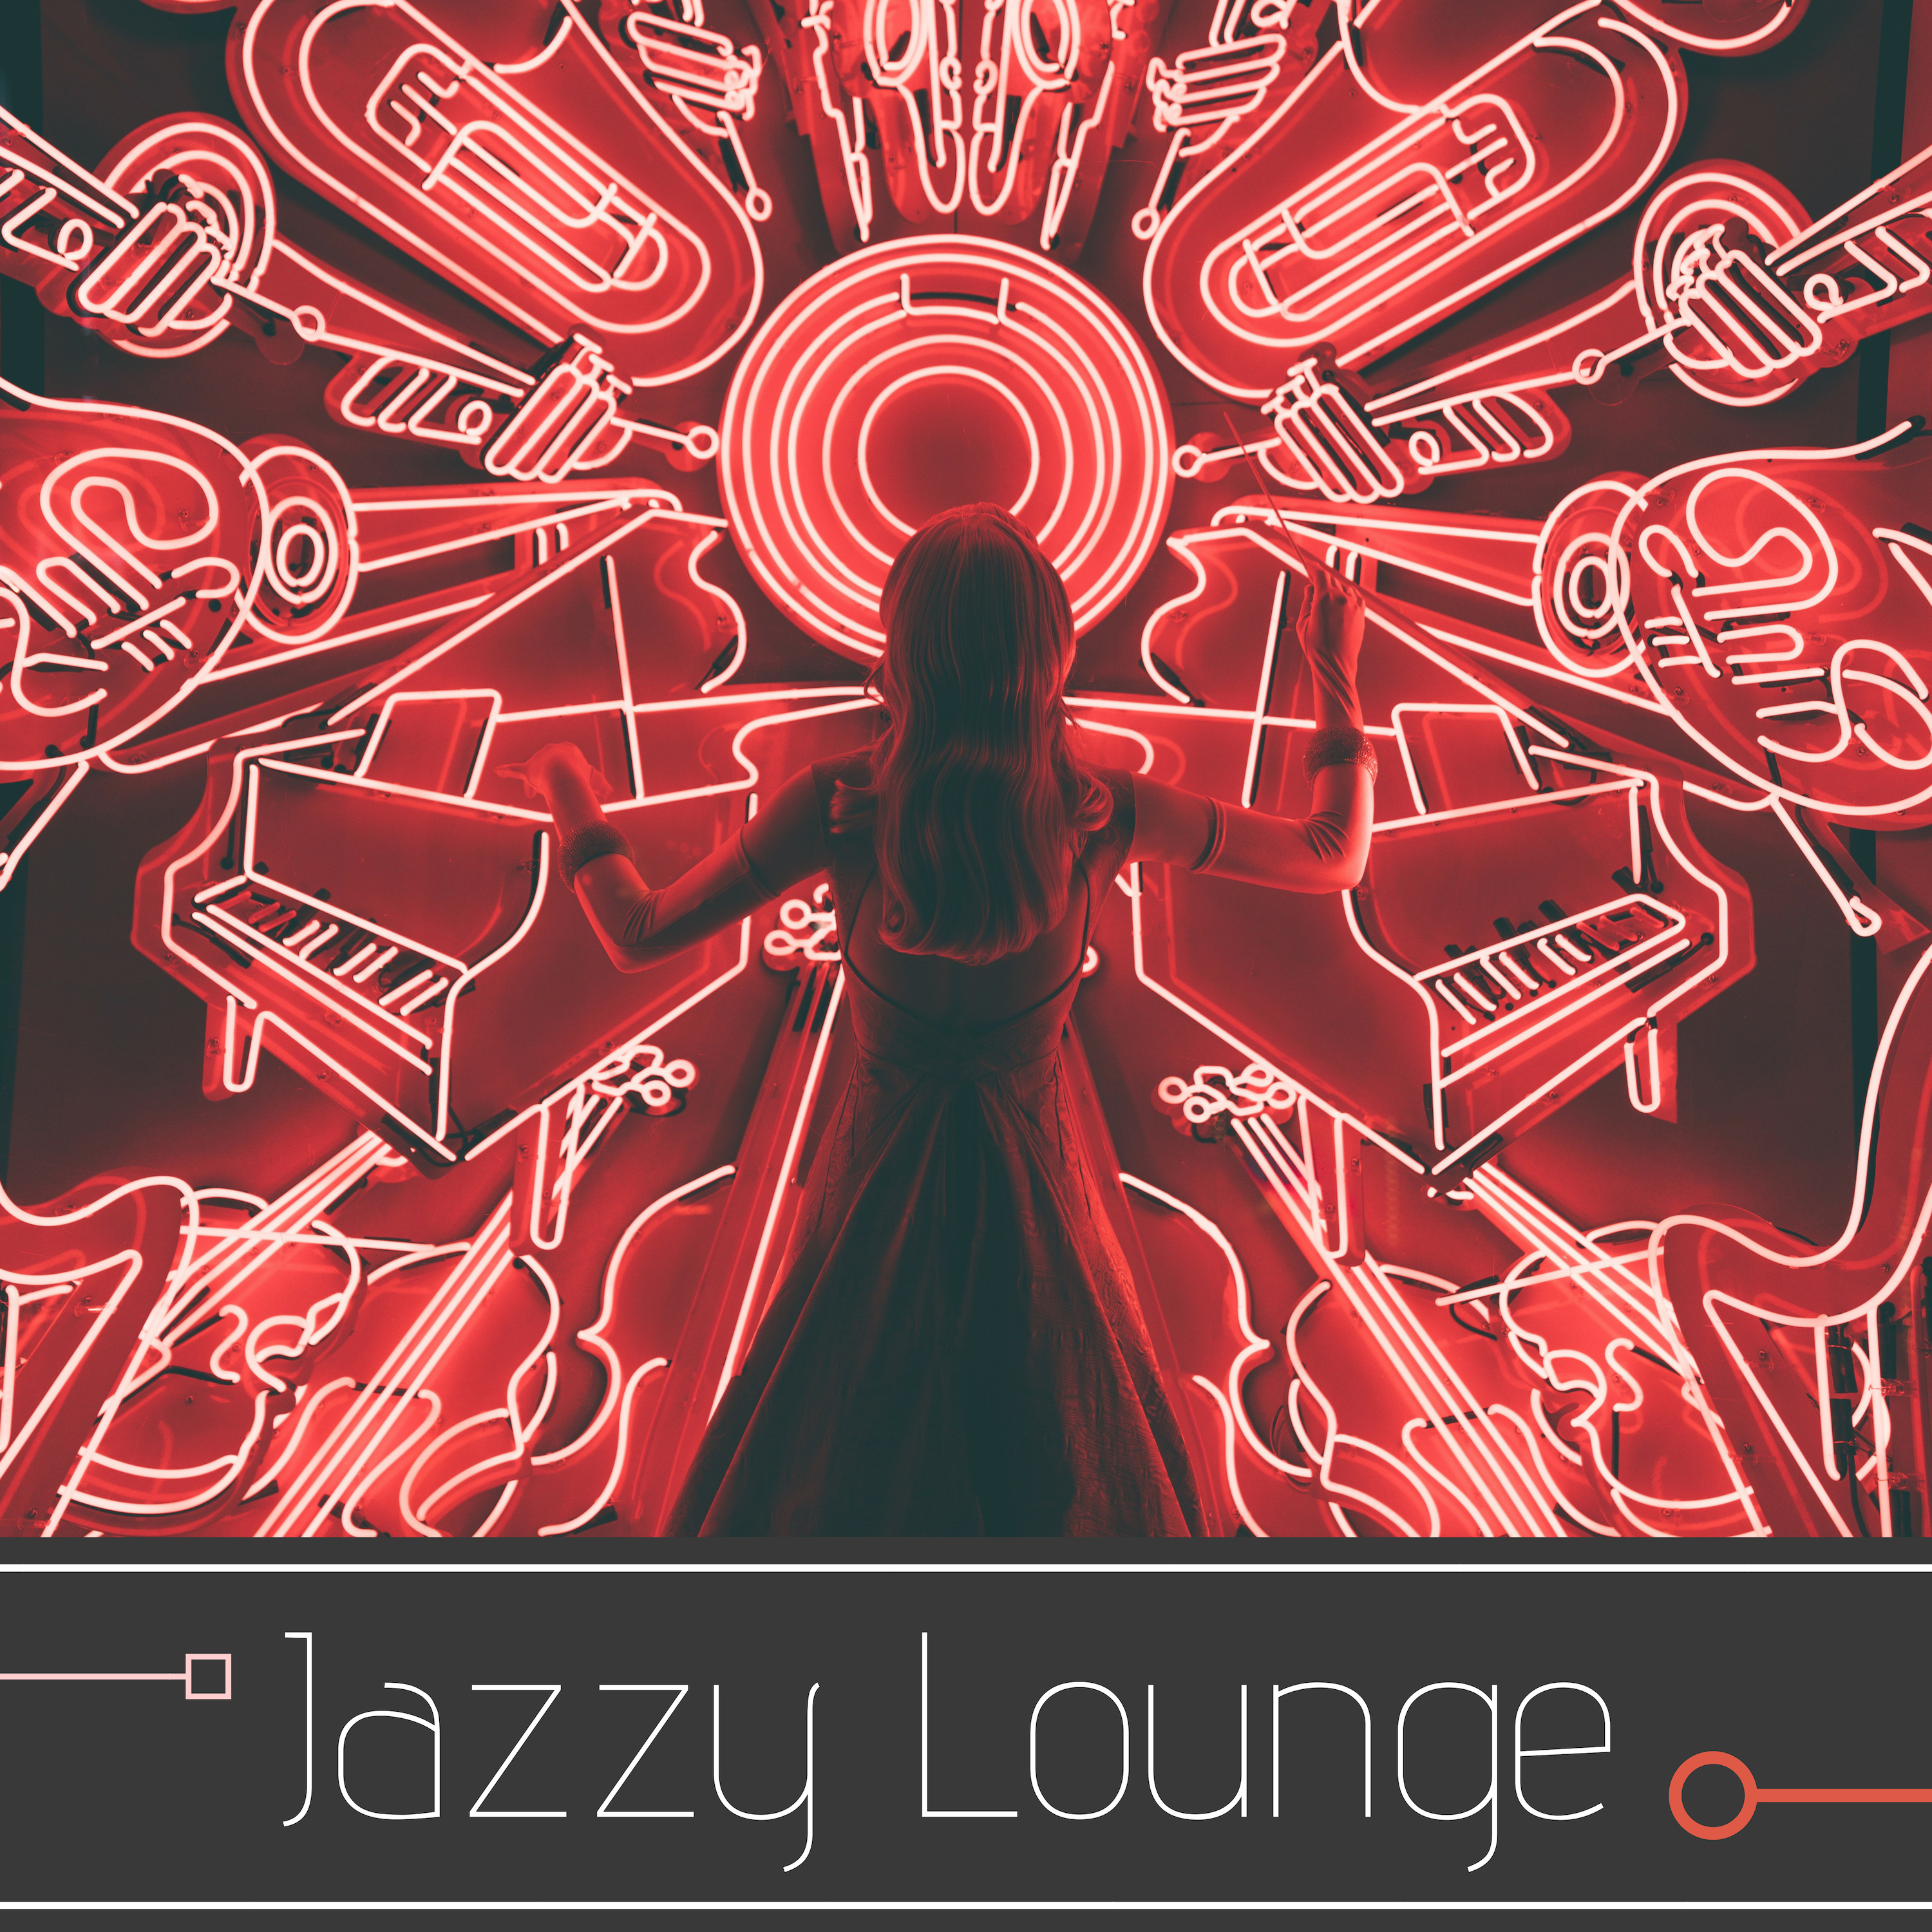 Jazzy Lounge - Sax Electro Swing Session, The Most Amazing Jazz Collection